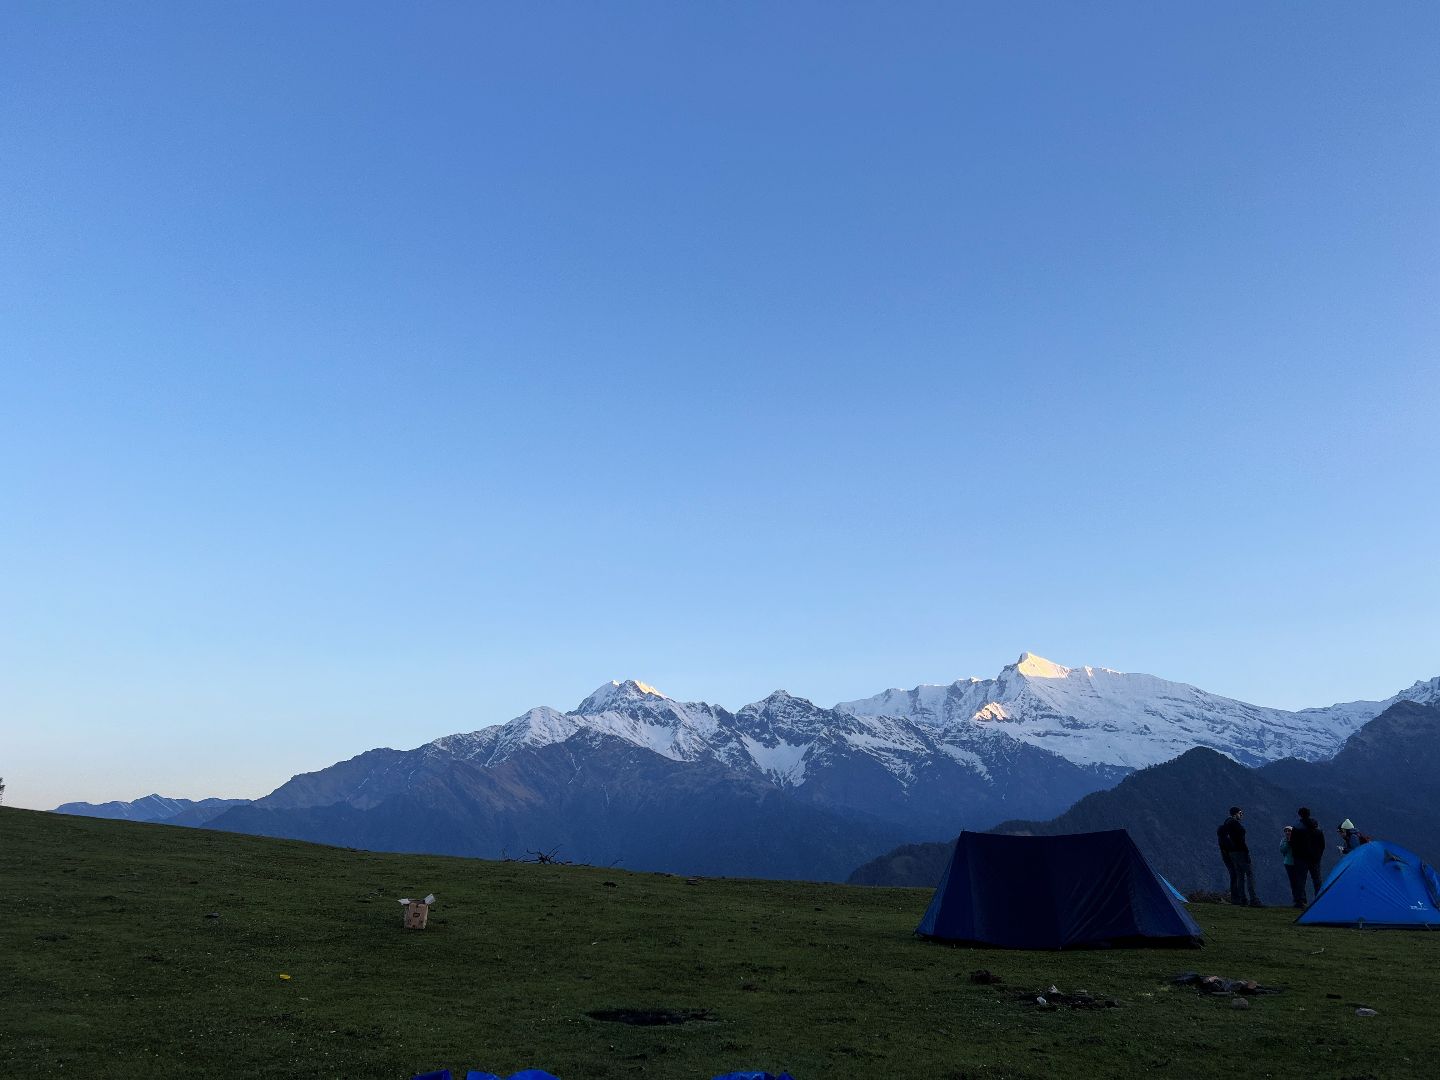 Setting up tents with himalayas in background